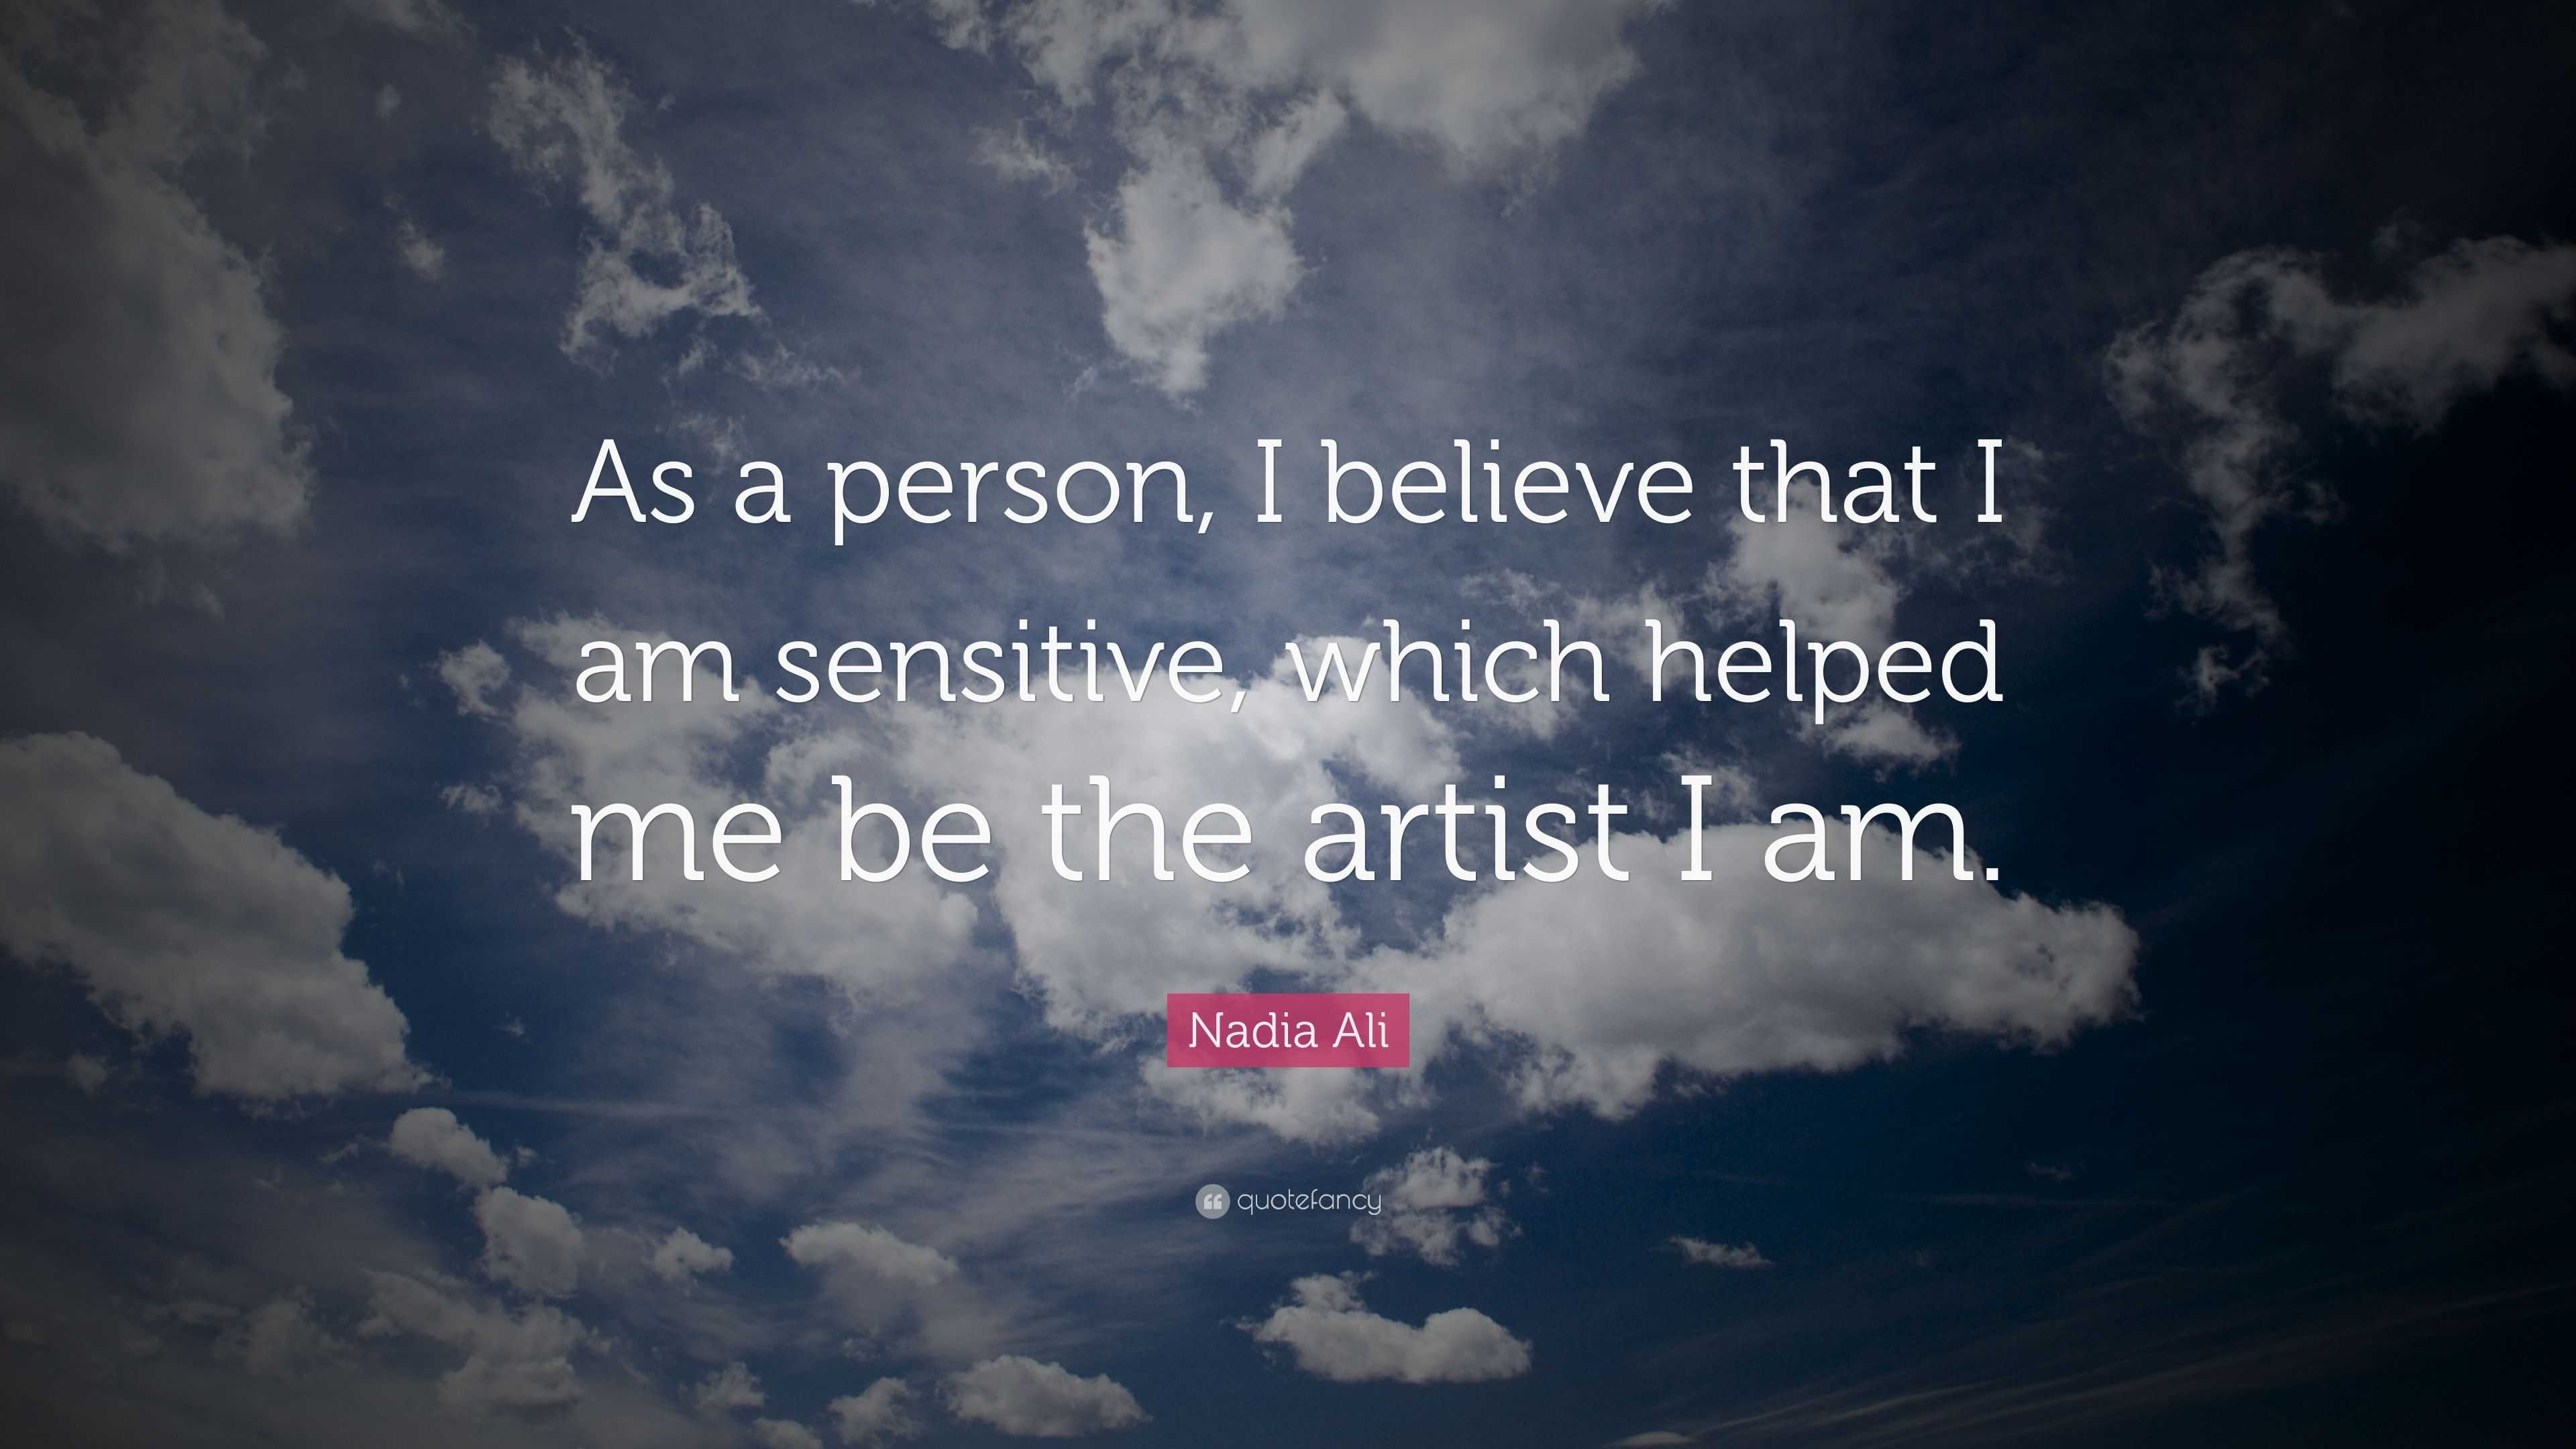 Nadia Ali Quote: “As a person, I believe that I am sensitive, which helped  me be